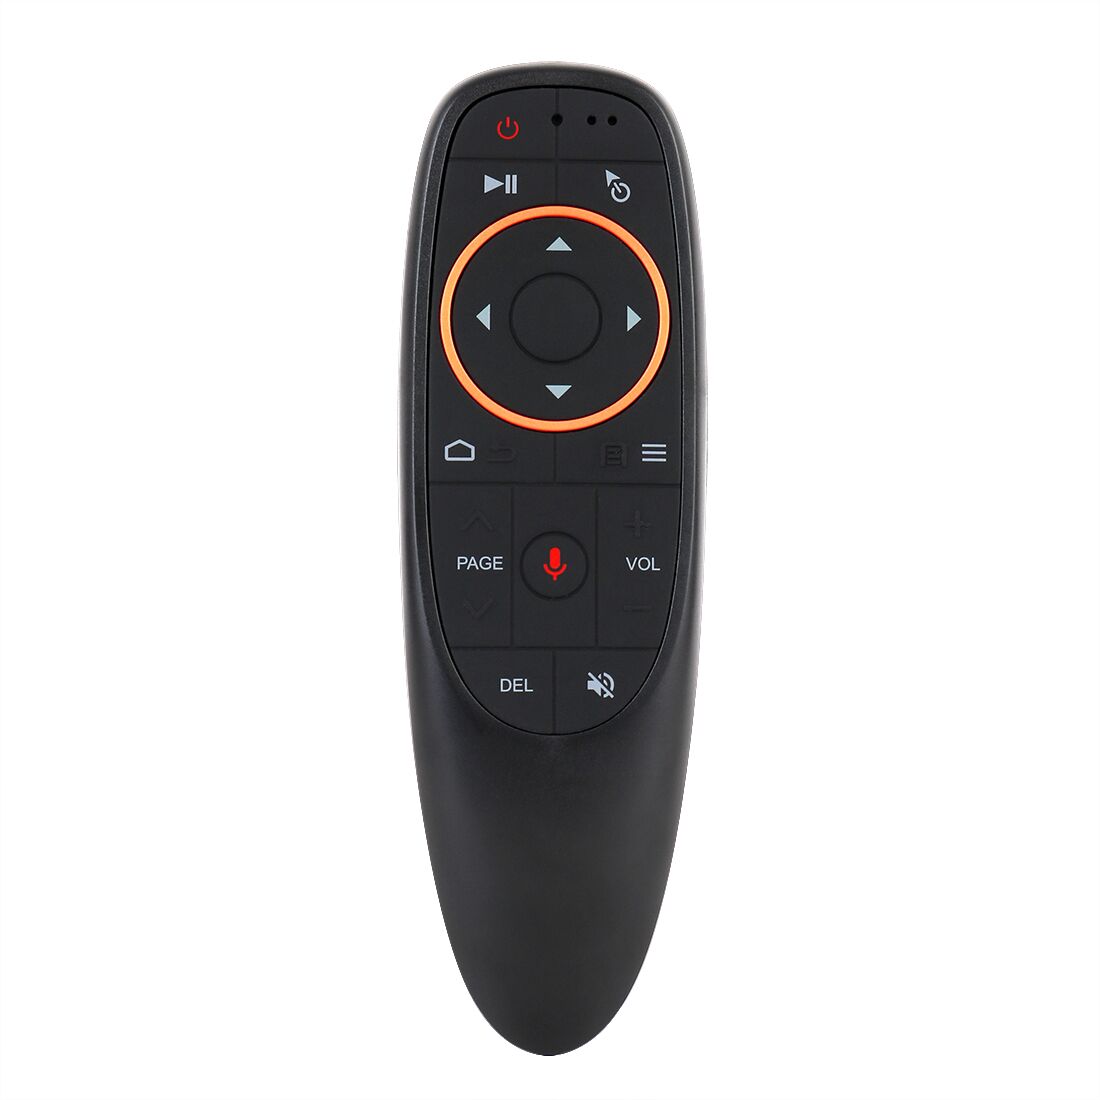 Voice Remote Control G10S 2.4G Wireless Air Mouse Used for Android TV Box